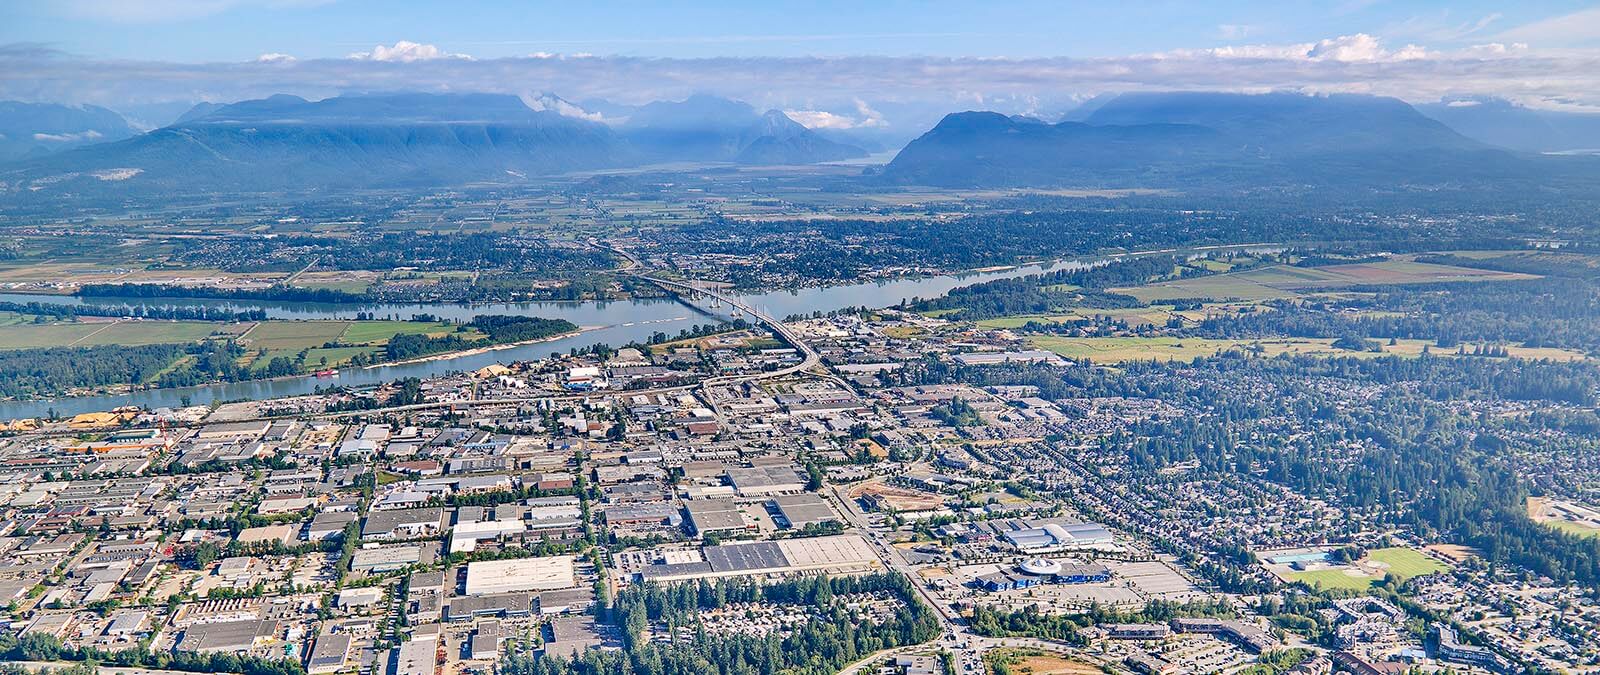 Aerial photo taken on a sunny day, trees and grass are green. Port Kells industrial area is in the foreground, the Fraser River and Golden Ears Bridge in the mid-ground, Golden Ears Mountains (and other mountains) in the background.